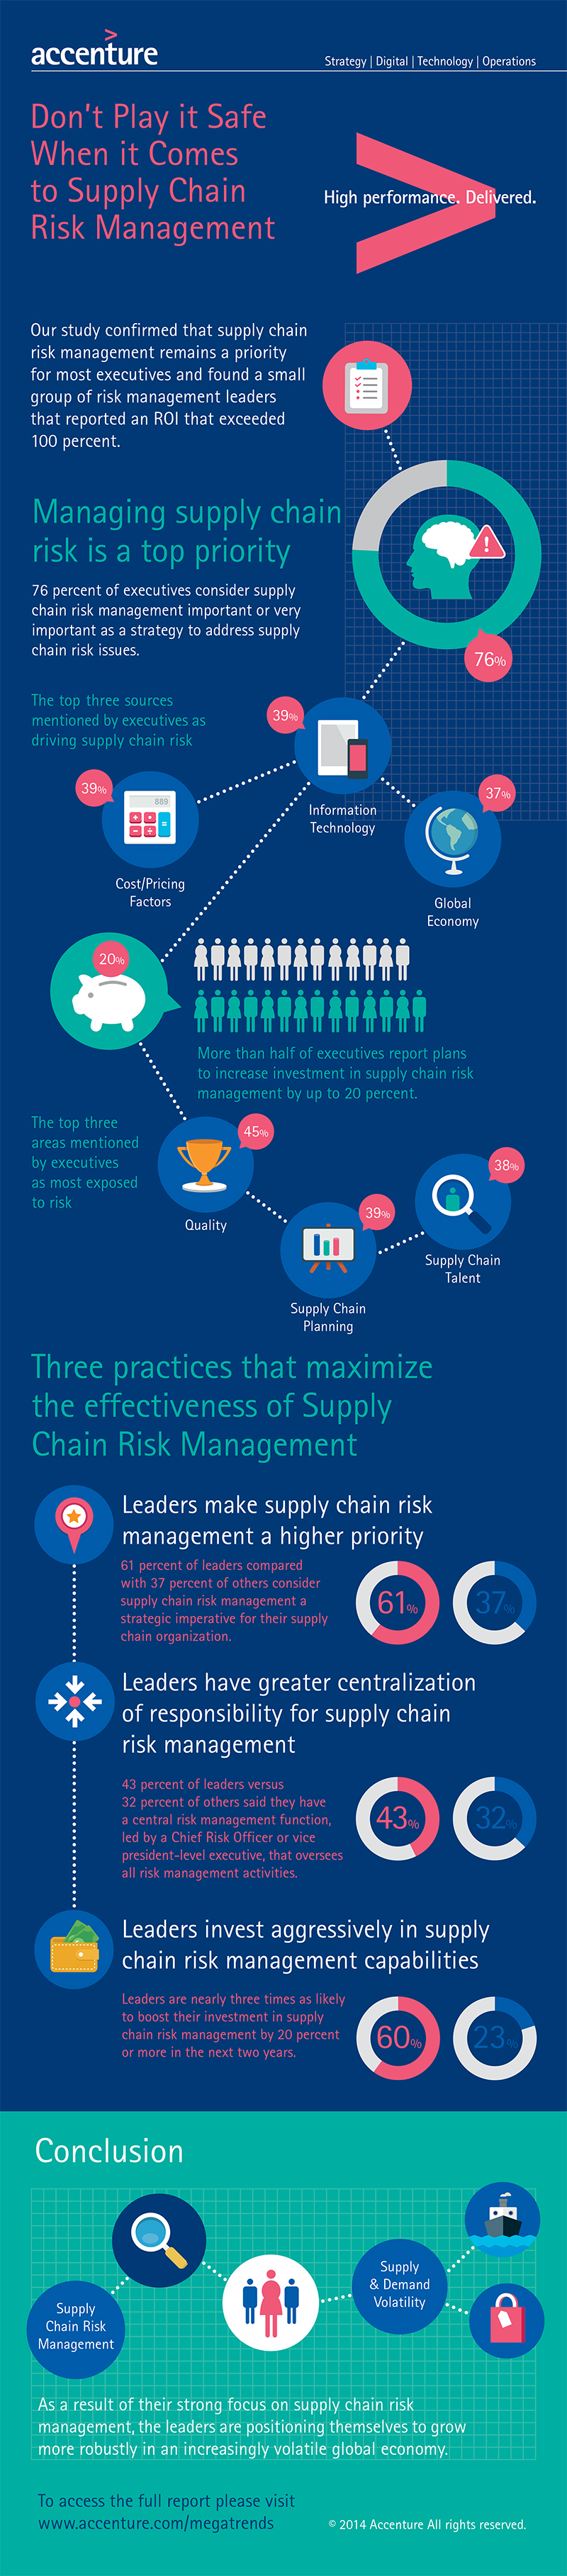 Don’t Play it Safe When it Comes to Supply Chain Risk Management